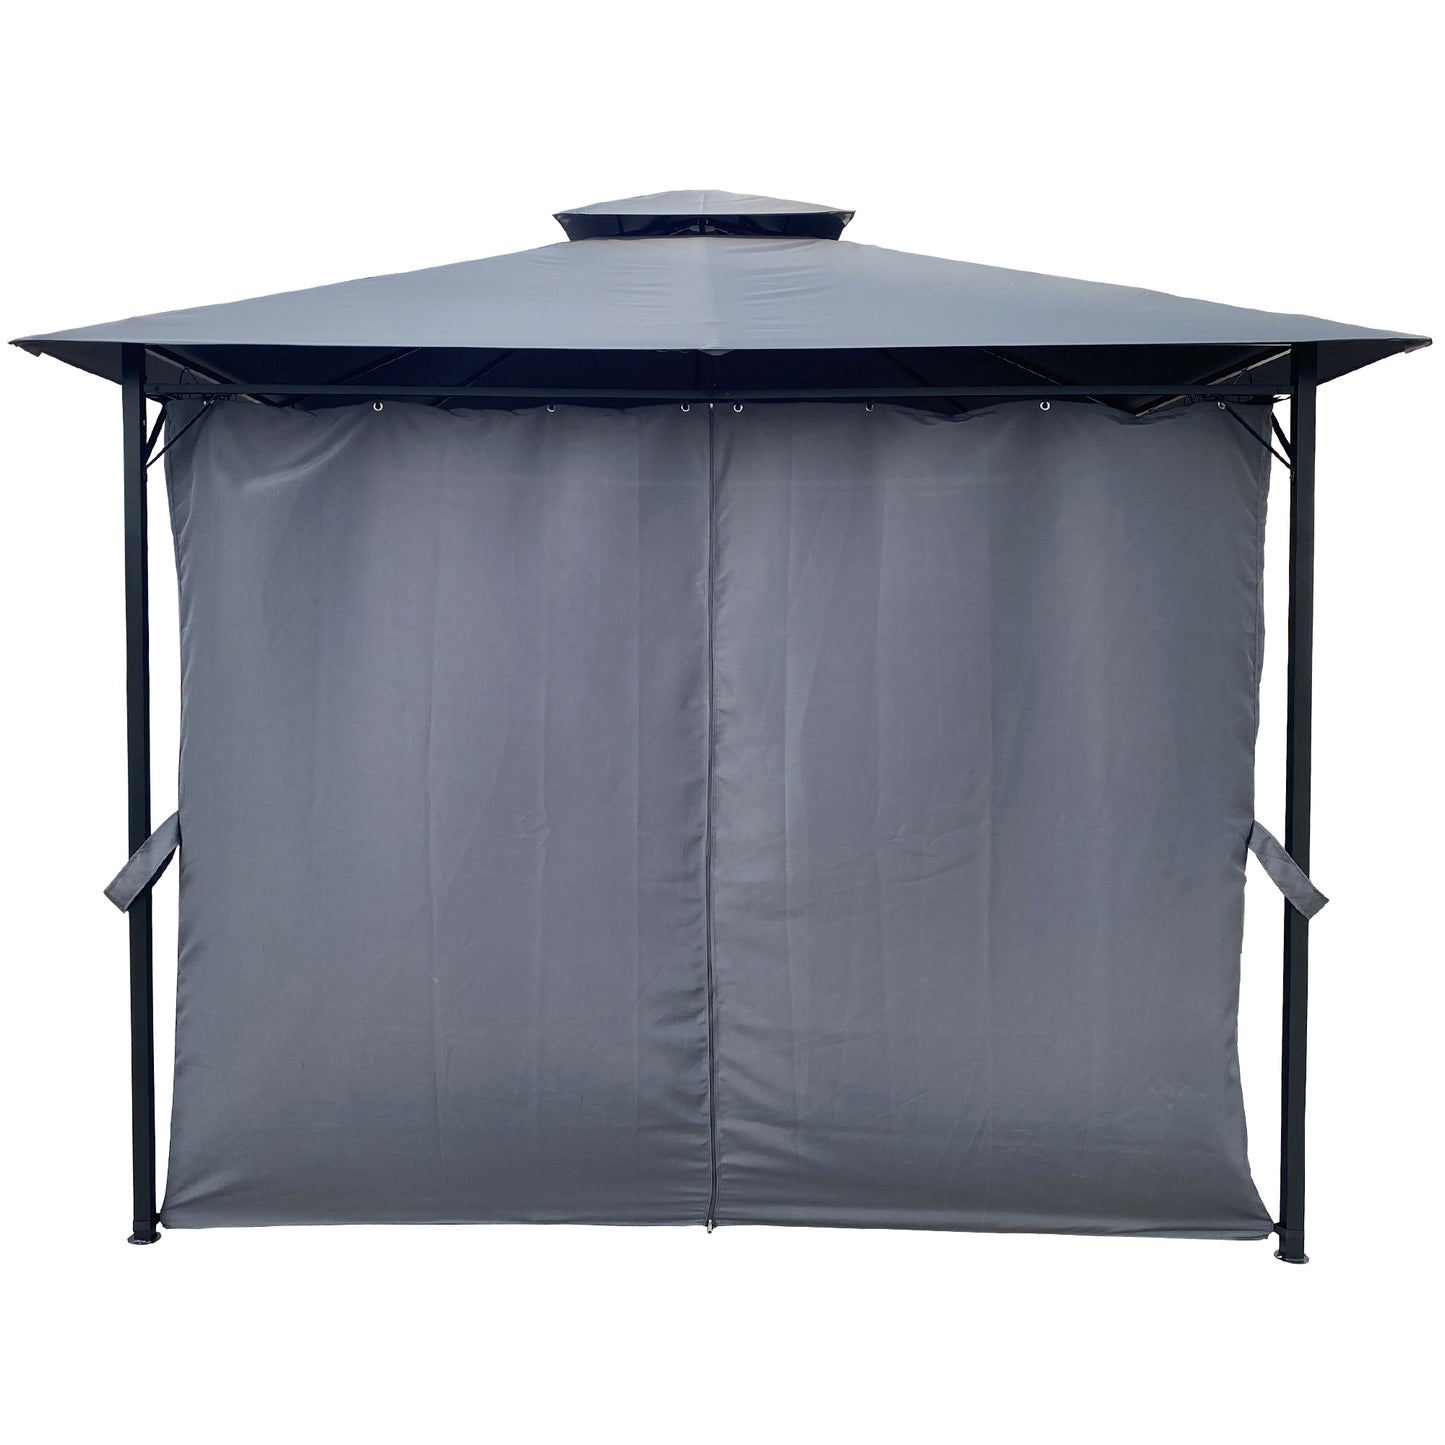 10x10 Ft Outdoor Patio Garden Gazebo Tent, Outdoor Shading, Gazebo Canopy With Curtains, Gray